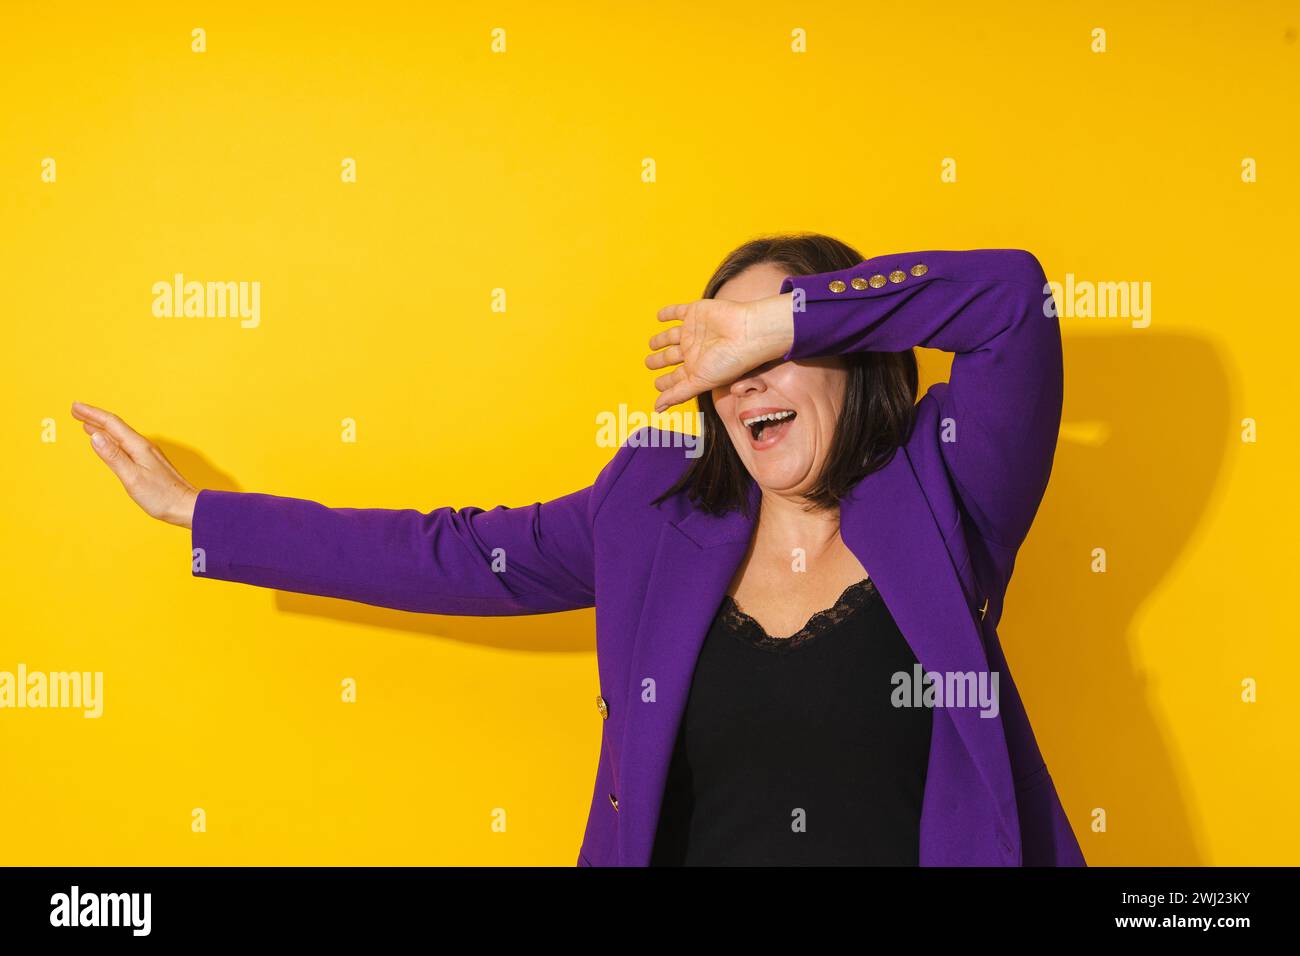 Cheerful middle aged woman wearing purple blazer dancing against yellow background Stock Photo